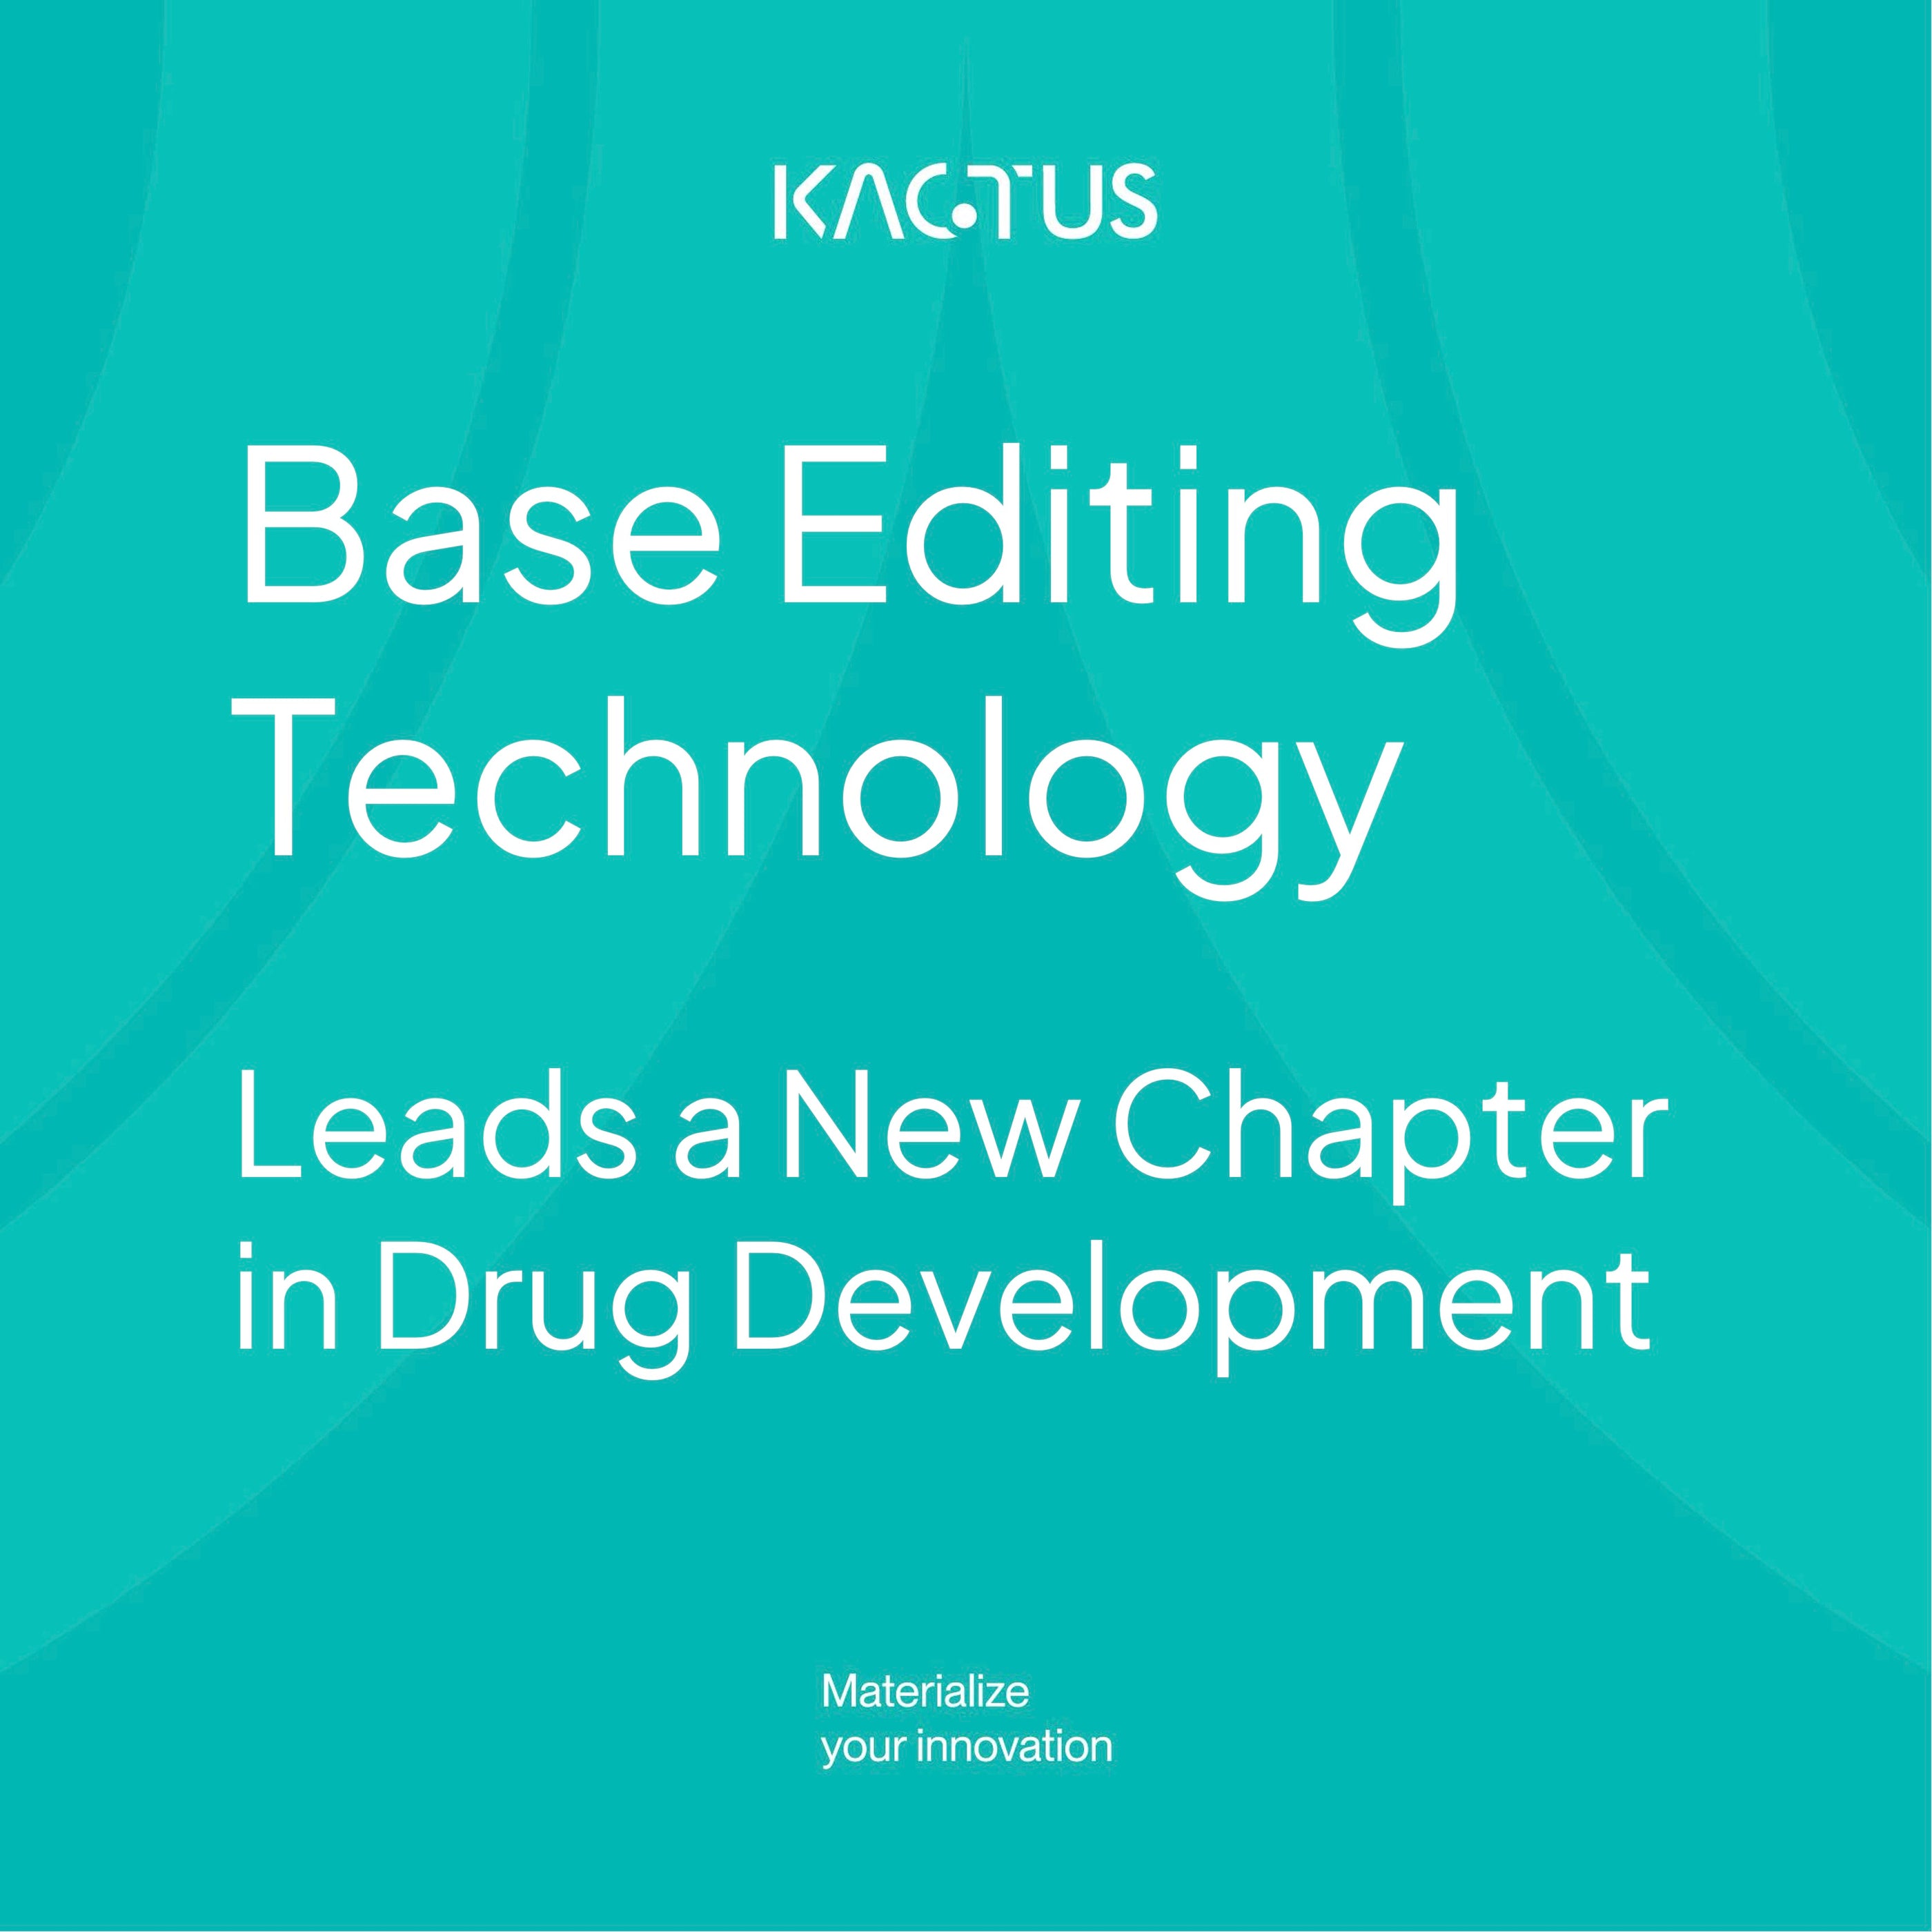 Base editing technology leads a new chapter in drug development